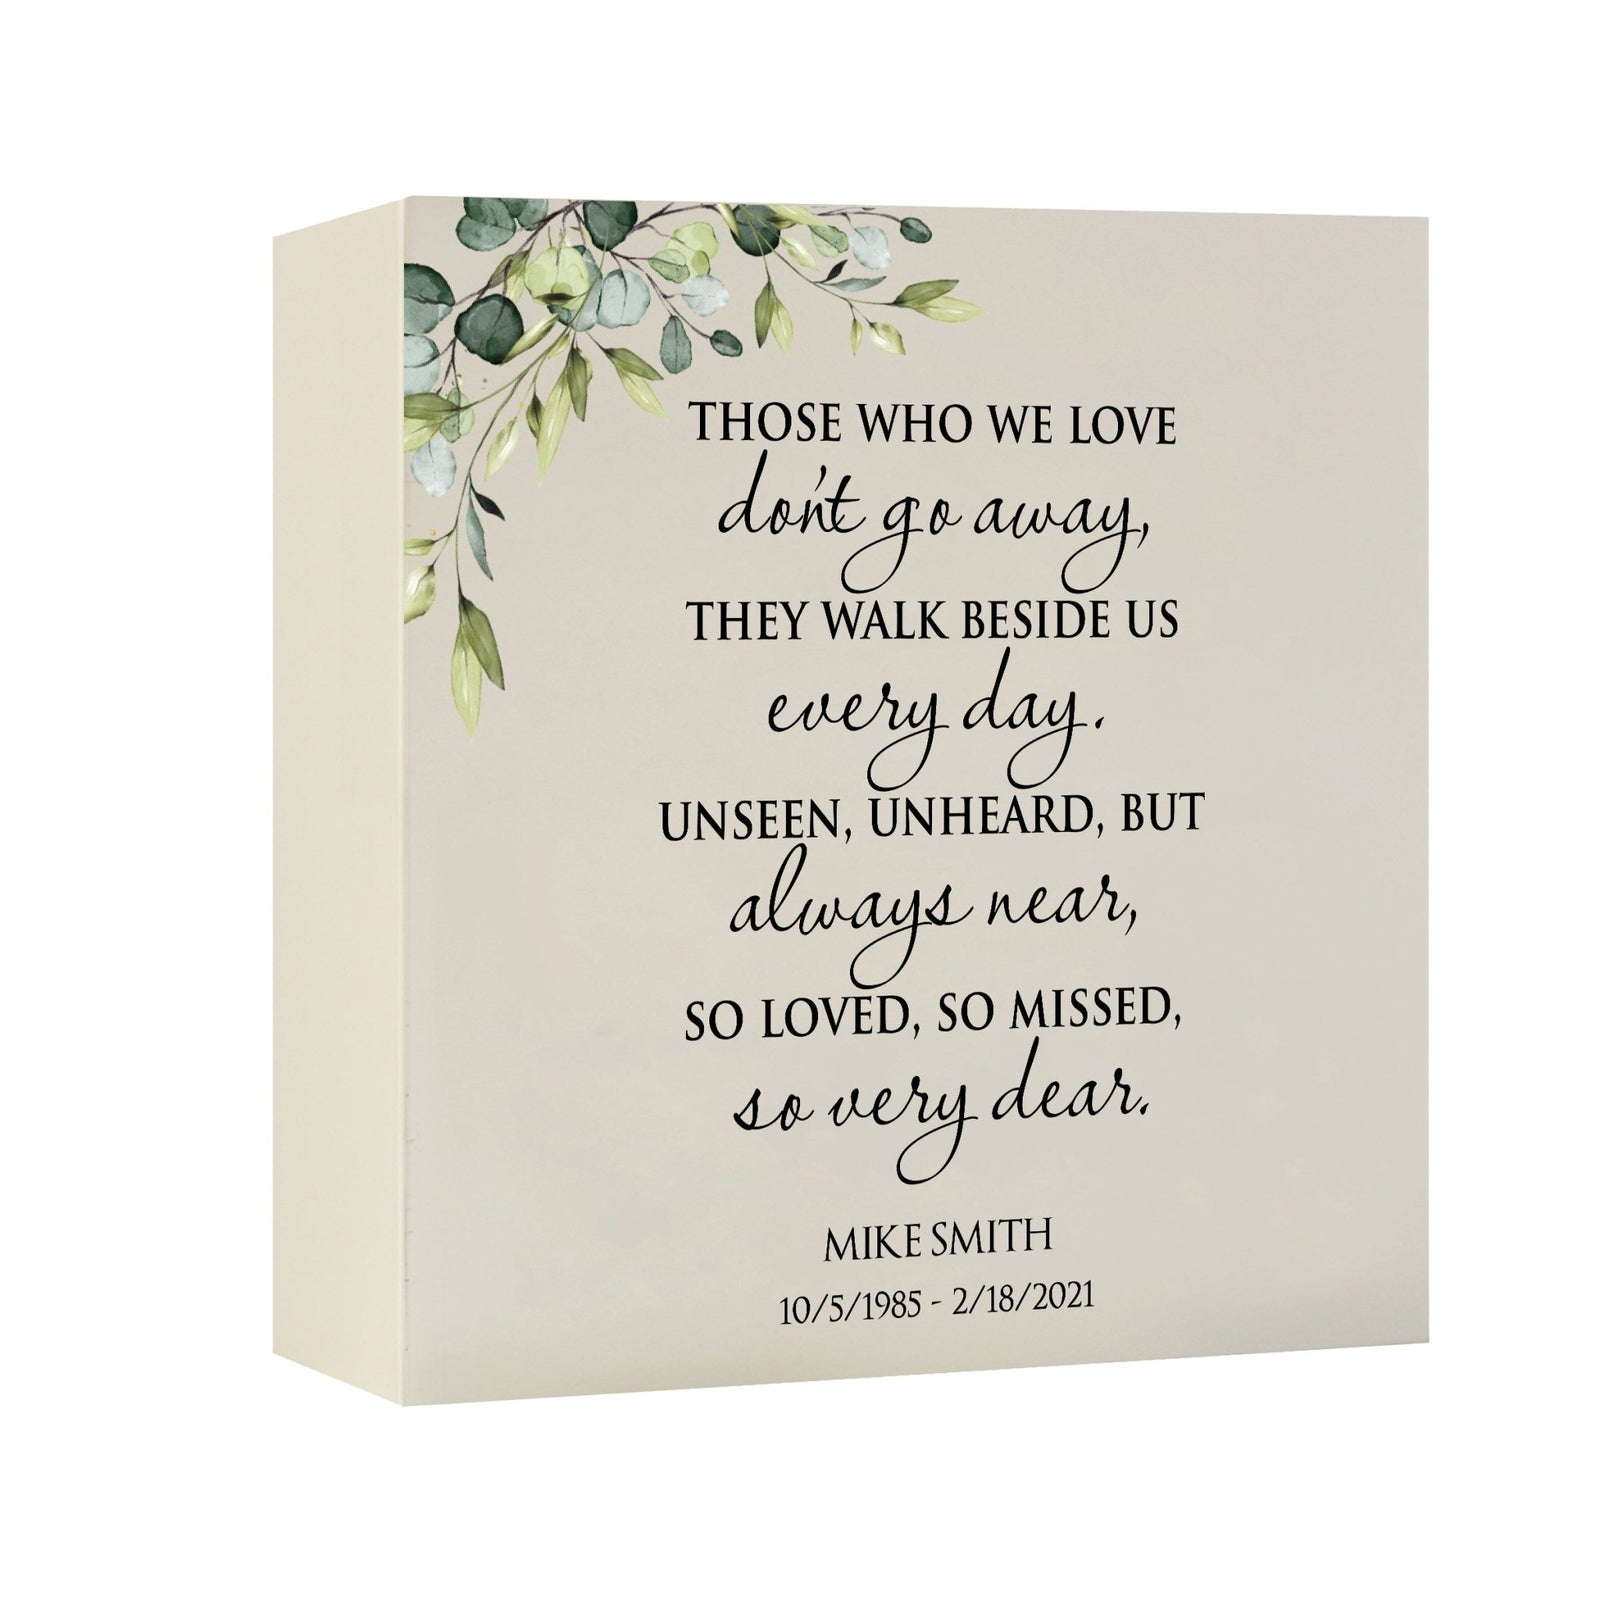 Timeless Human Memorial Shadow Box Urn With Inspirational Verse in Ivory - Those Who We Love - LifeSong Milestones